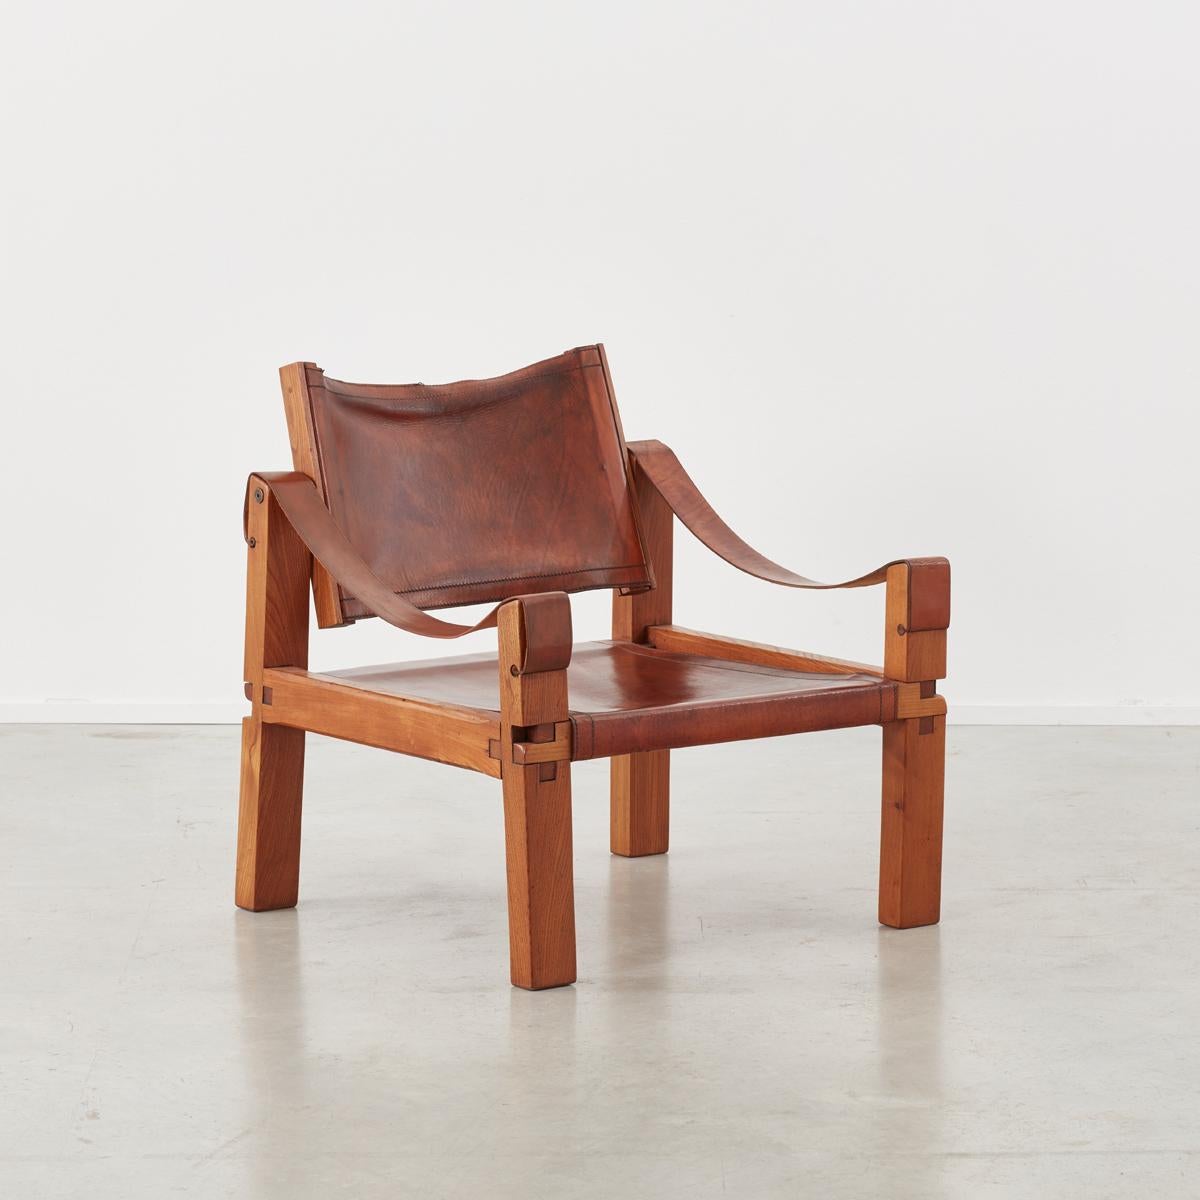 Pierre Chapo (1927-1987) was a French craftsman who specialised in handmade wooden furniture using traditional craftsmanship. The S10 chair is crafted from solid elm and cognac leather with a pleasing aged patina.

The chair’s detailing at first